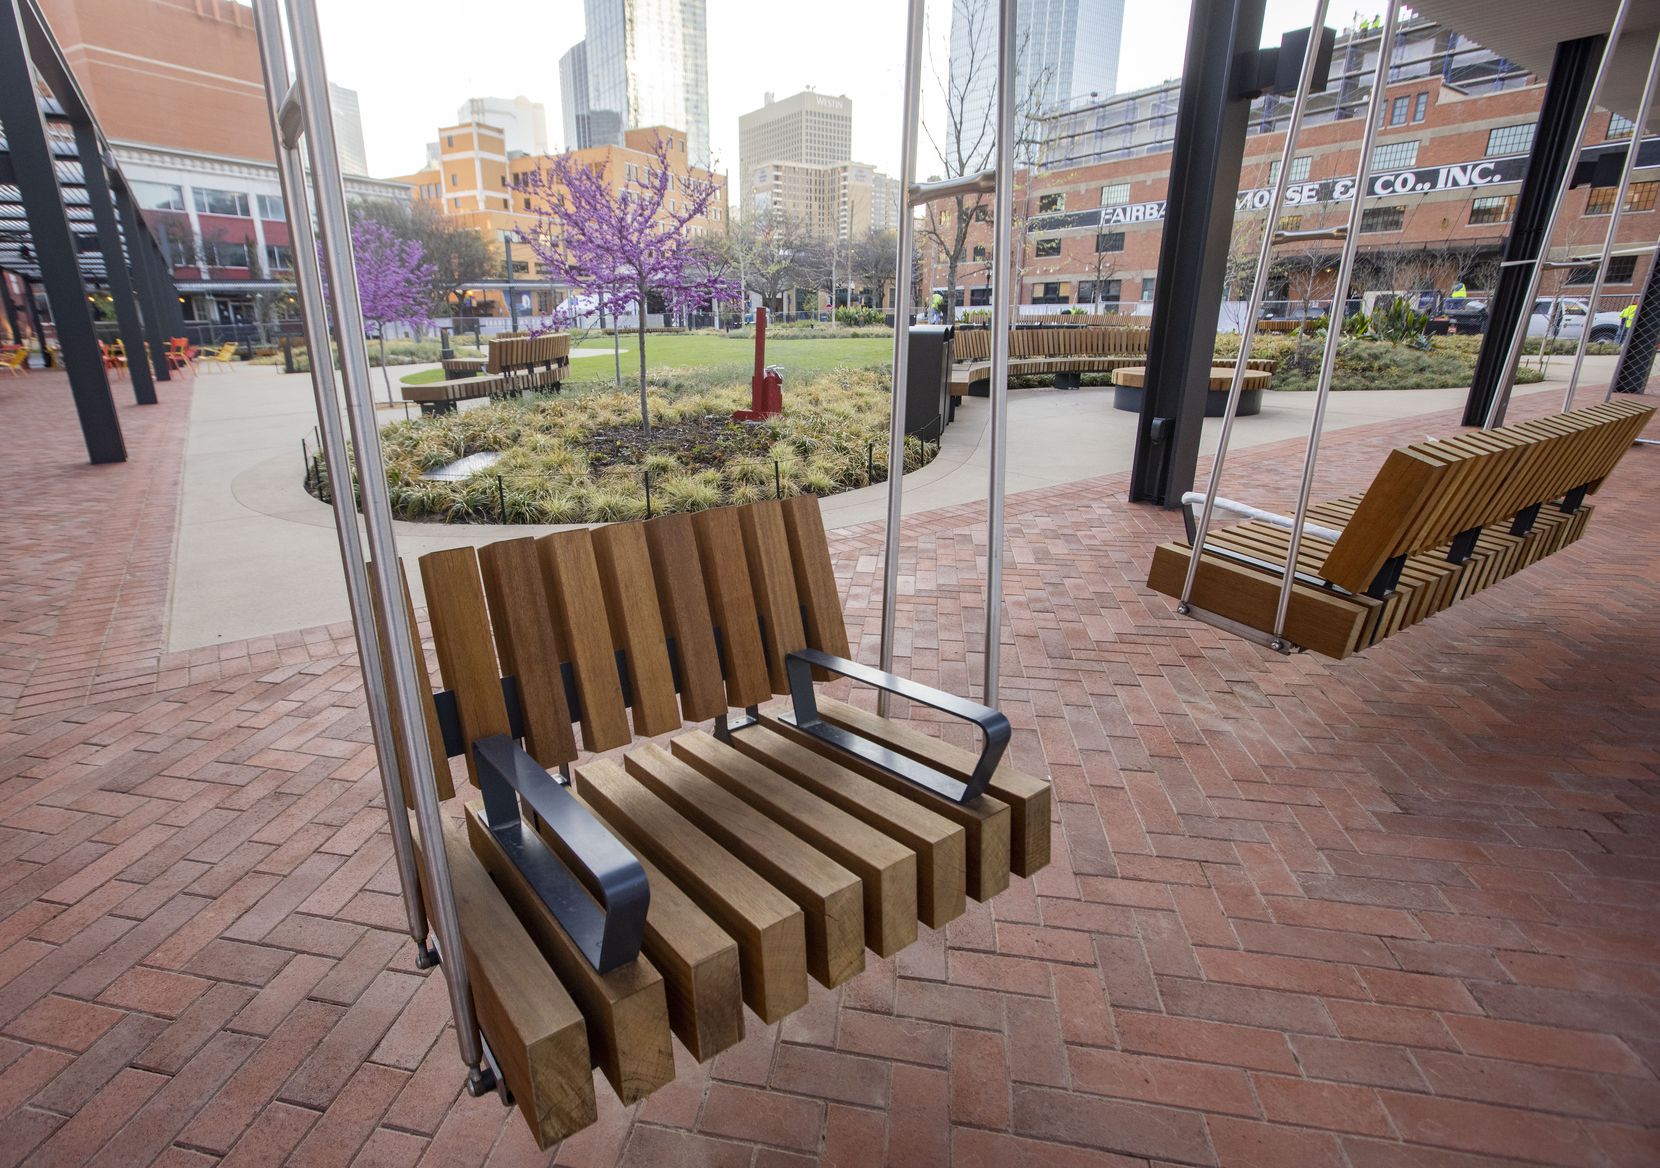 Porch swings at the West End Square park in Dallas on Friday, March 19, 2021. 